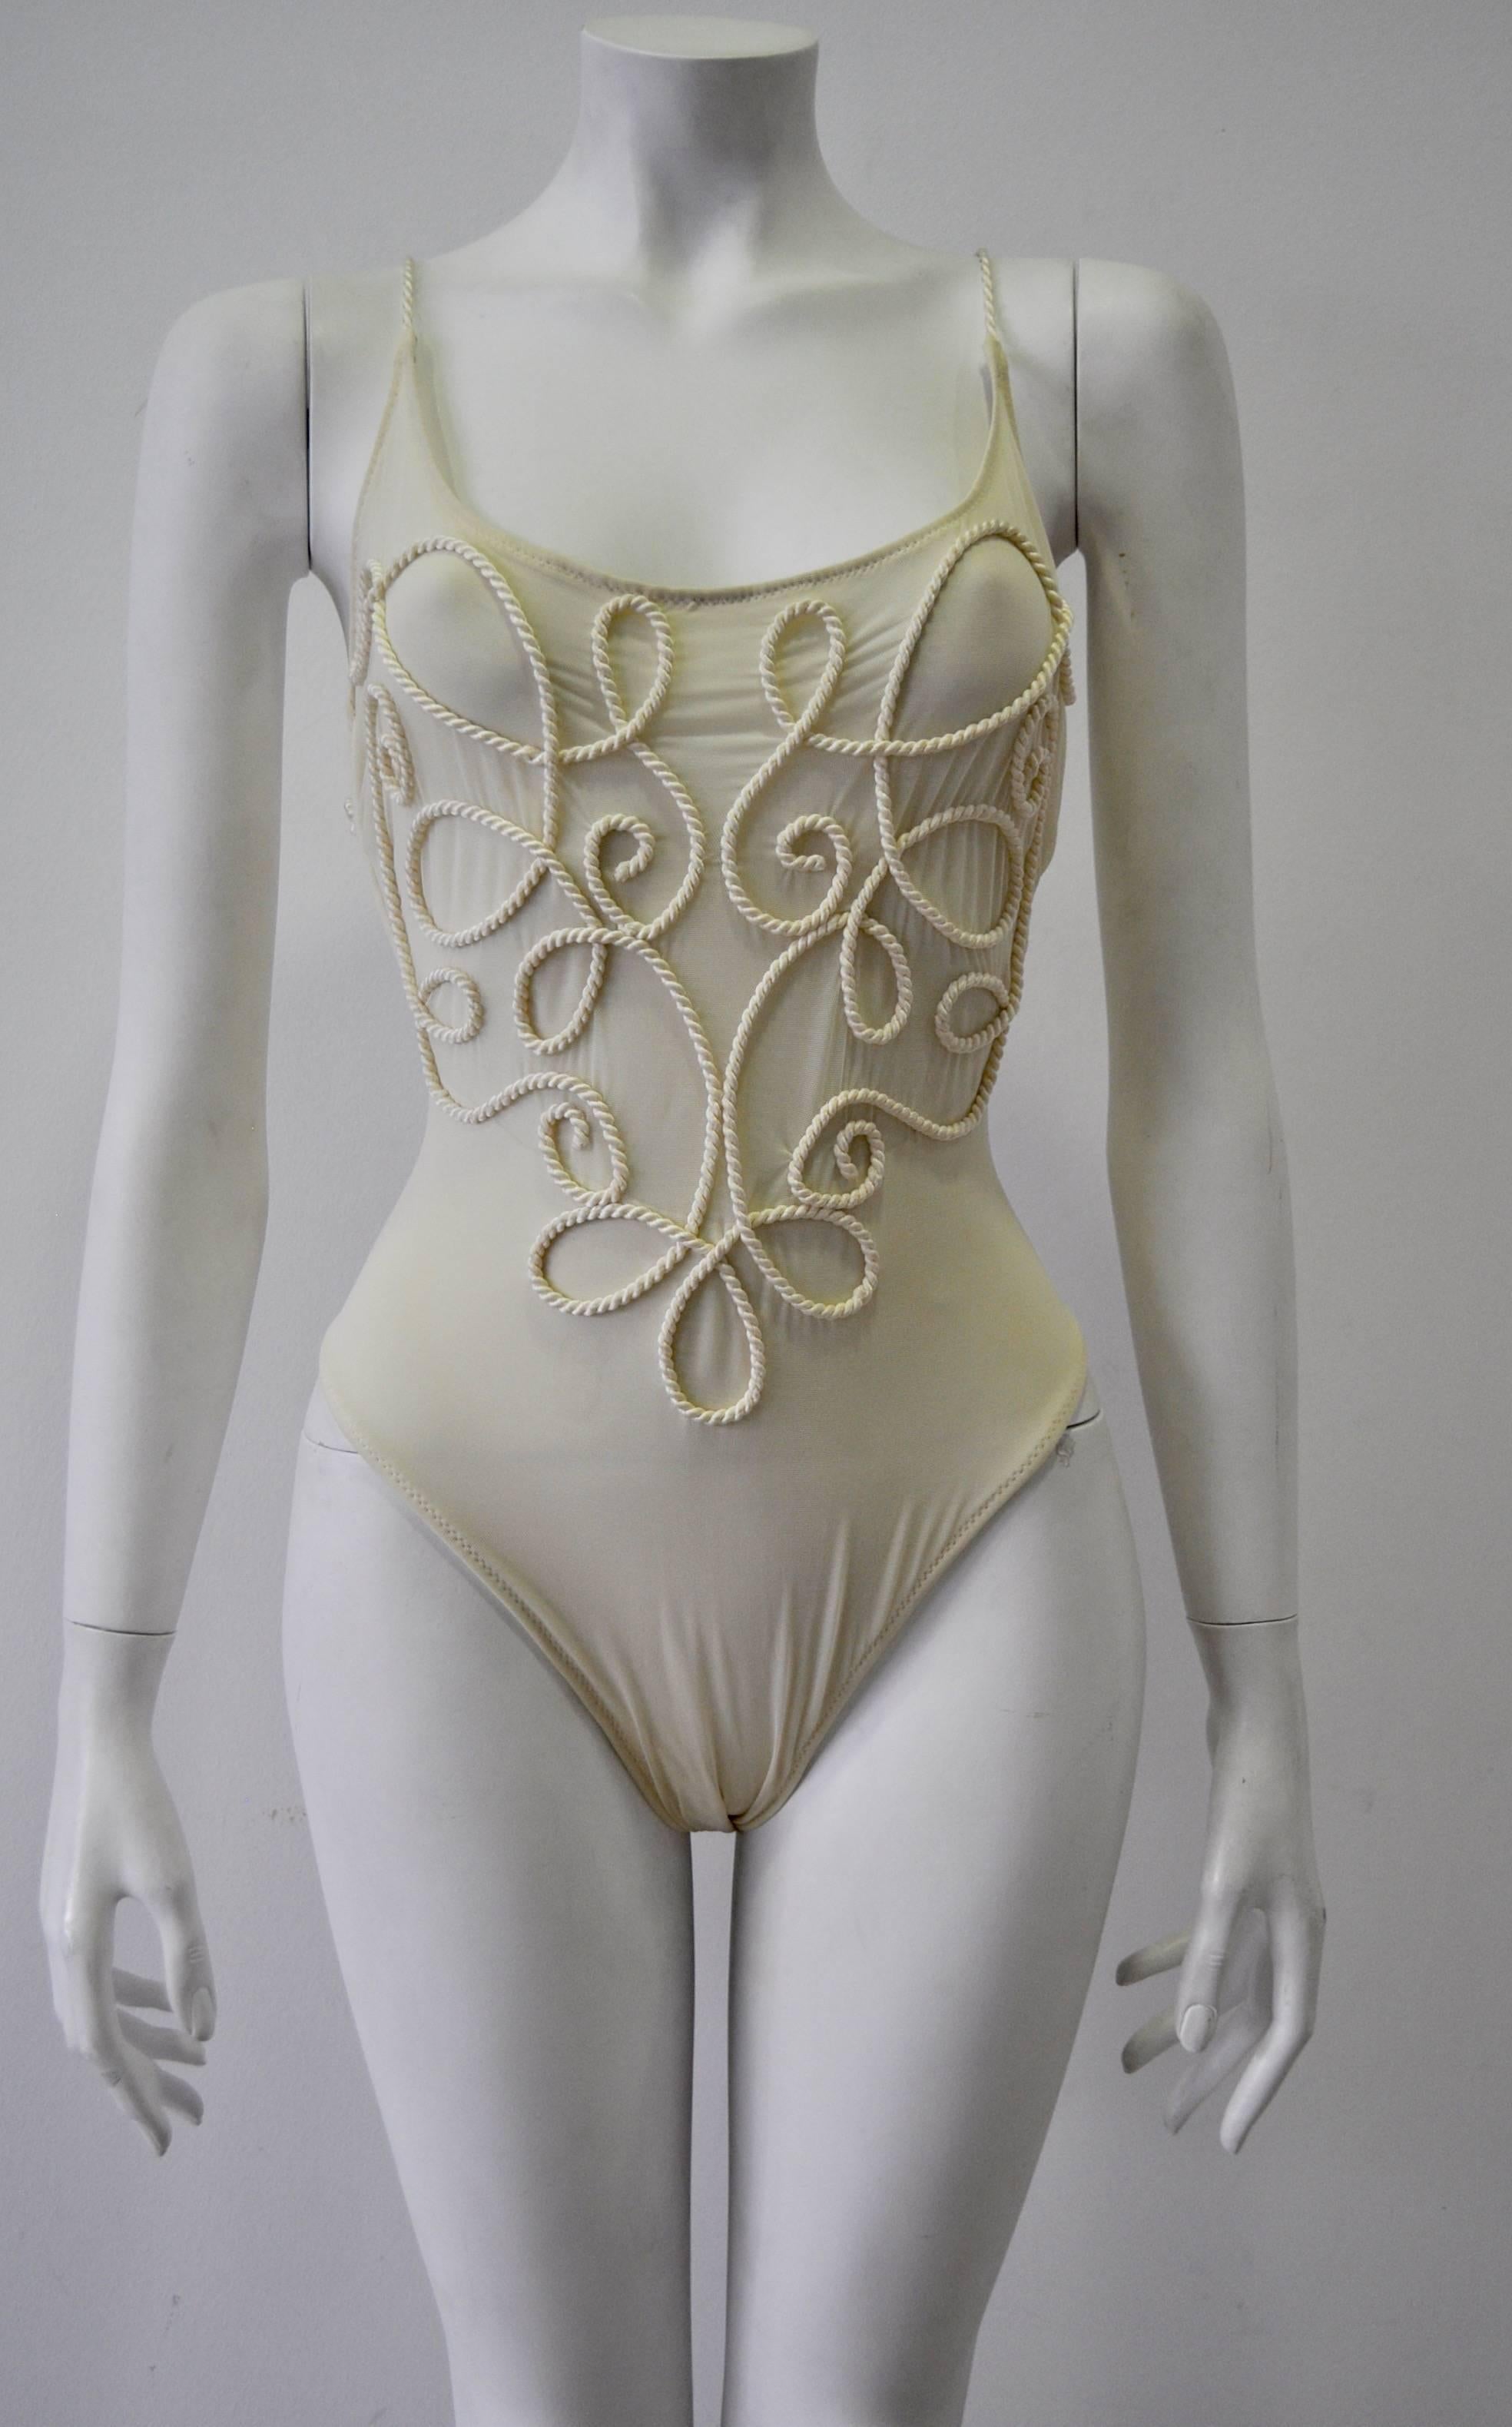 Exquisite Gianfranco Ferre Cream Rope Embroidery Embellished Swimsuit In Excellent Condition For Sale In Athens, Agia Paraskevi